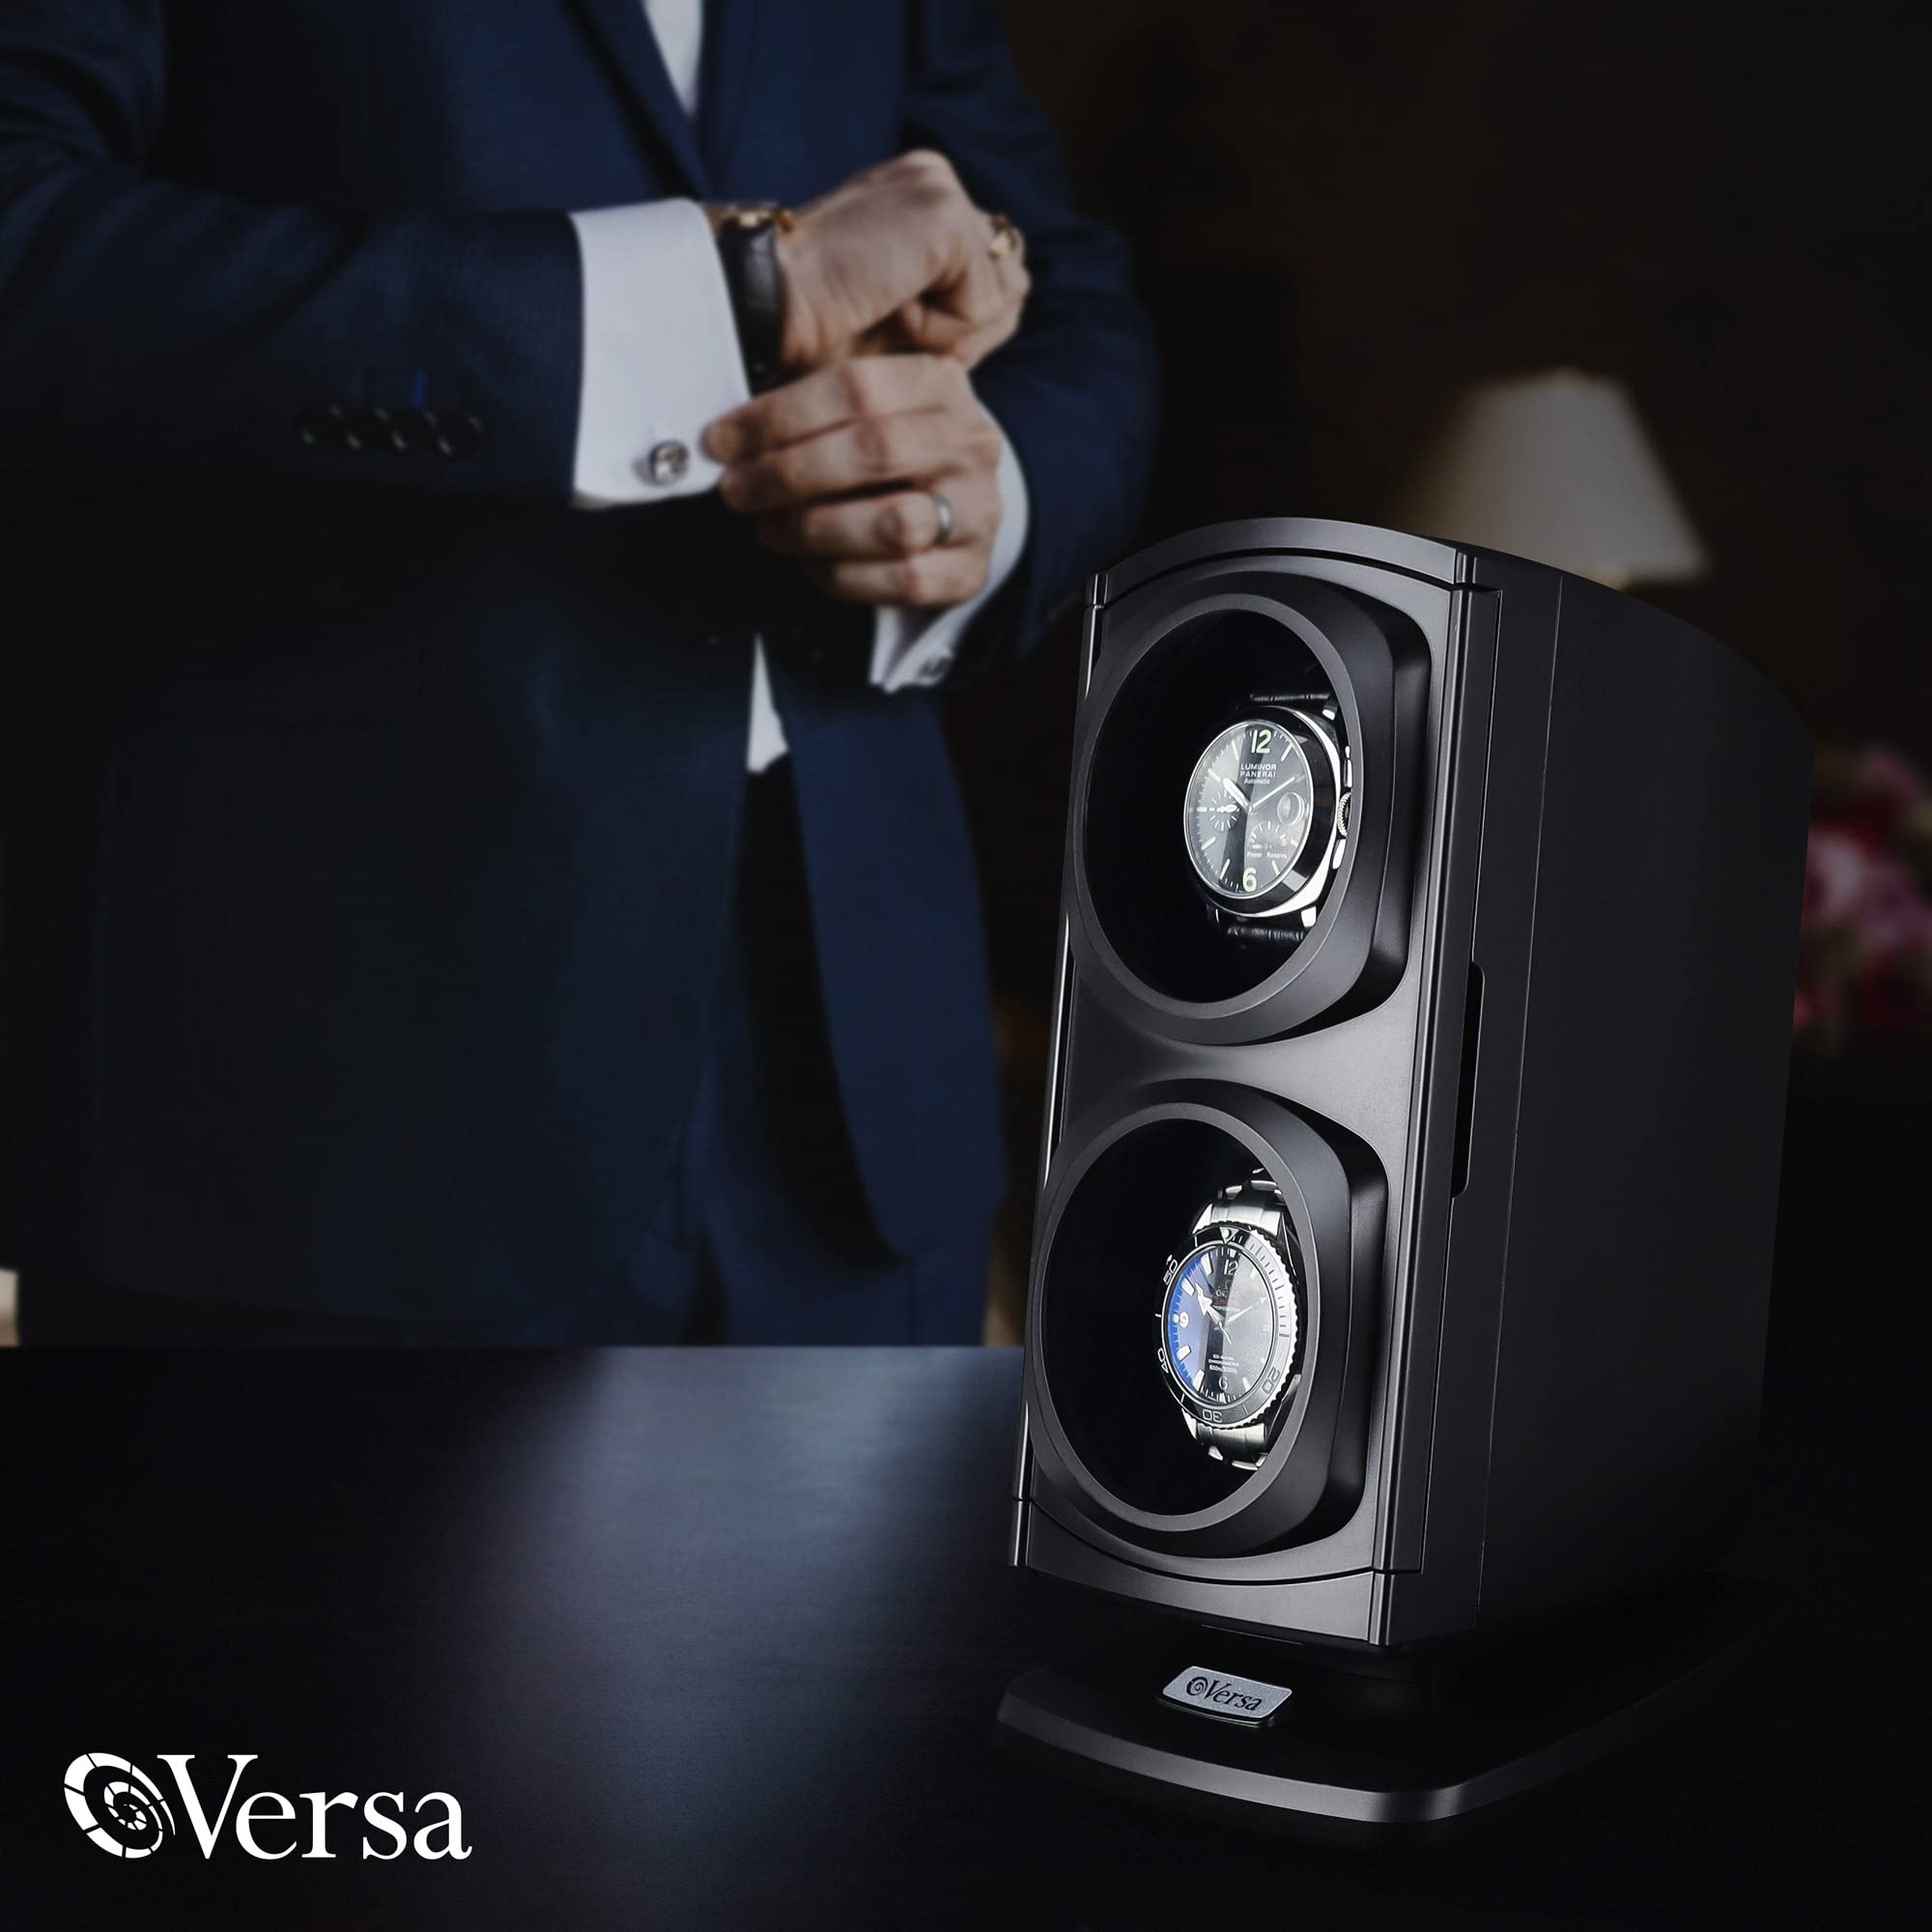 Versa [Newly Upgraded] Automatic Double Watch Winder in Black - New Direct Drive Motor, Independently Controlled Settings, 12 Different Settings, Adjustable Watch Pillows - No Magnets